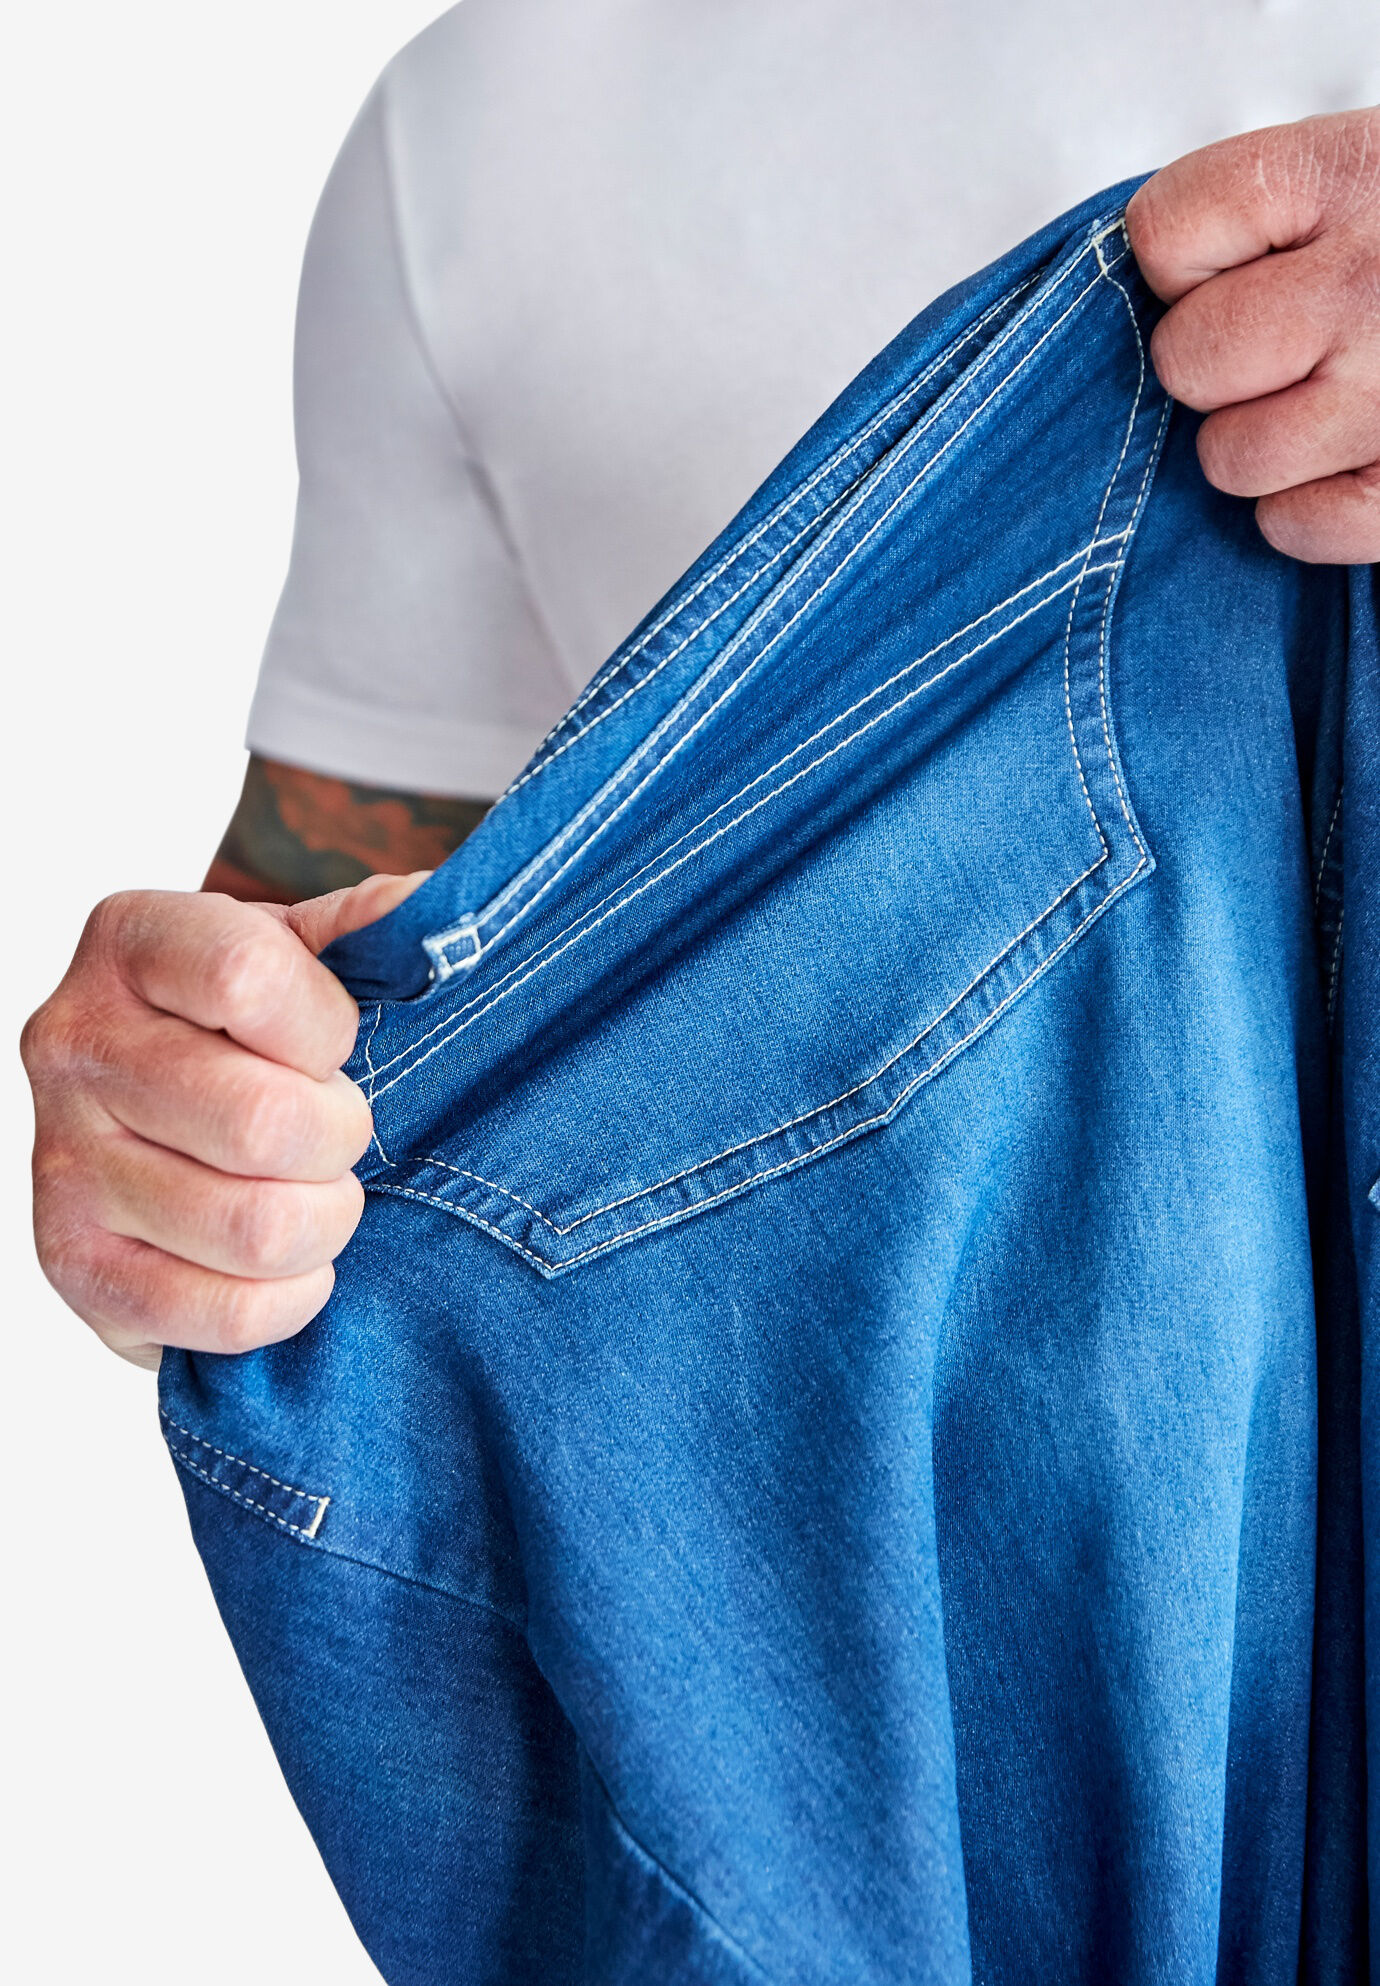 Men's Jeans Jogger Denim Style Sweatpants Jogging Jeans Used Look Jeans  Destroyed Leisure Casual Style Slim Fit Narrow Leg, A light blue, S :  Amazon.co.uk: Fashion